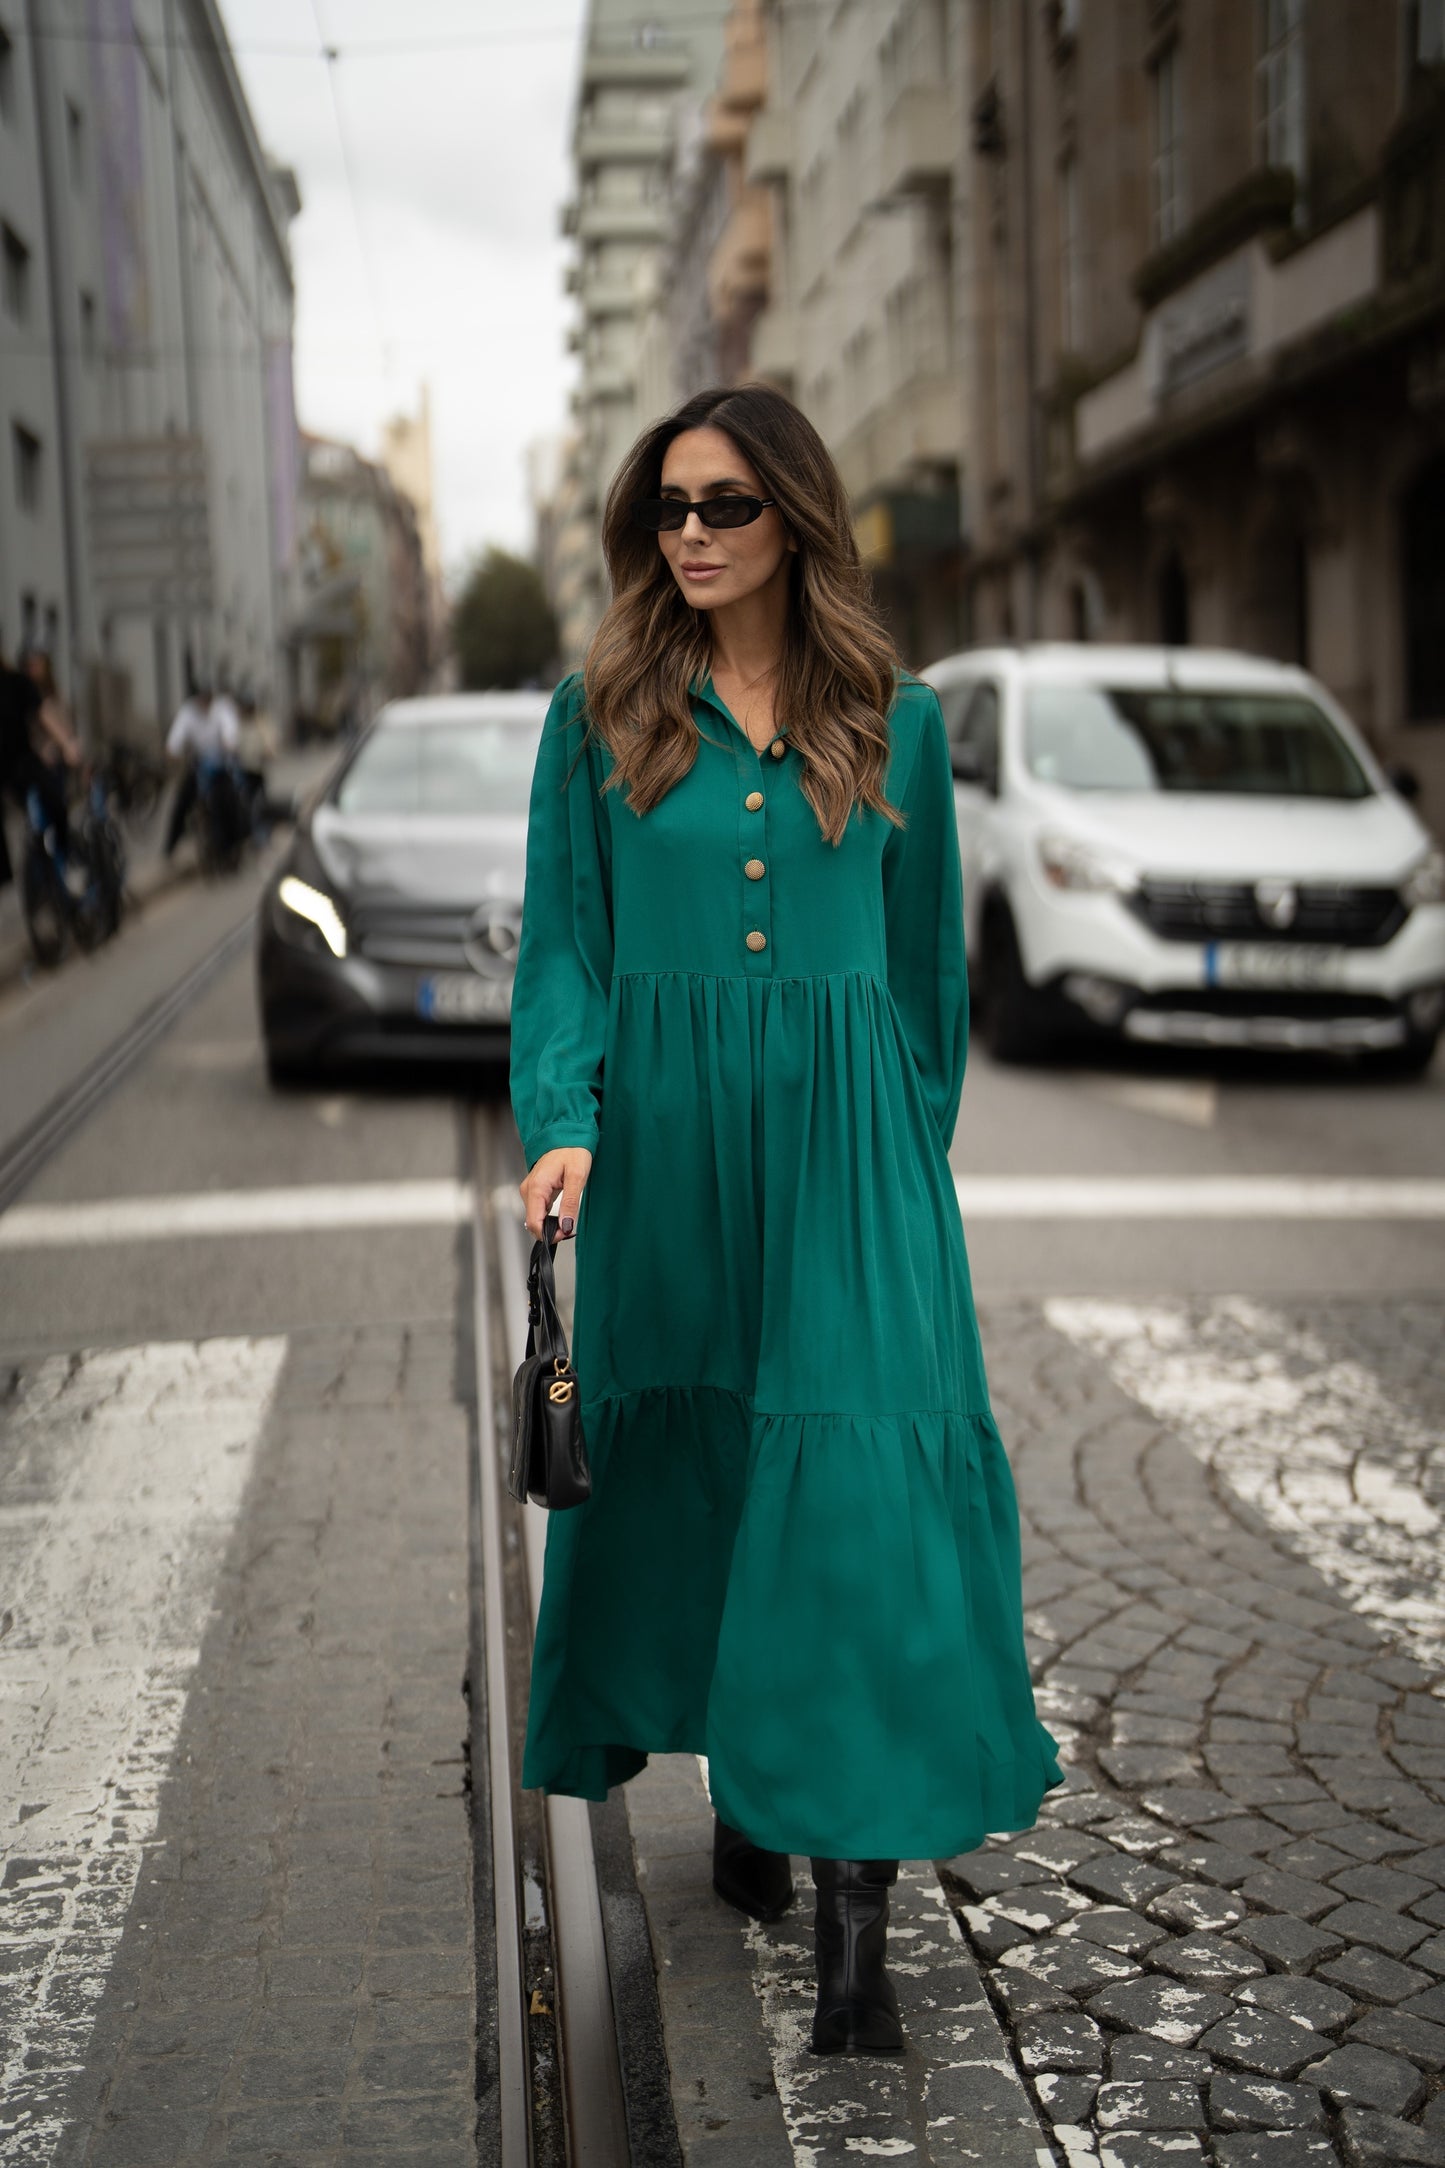 Long dress with gold buttons